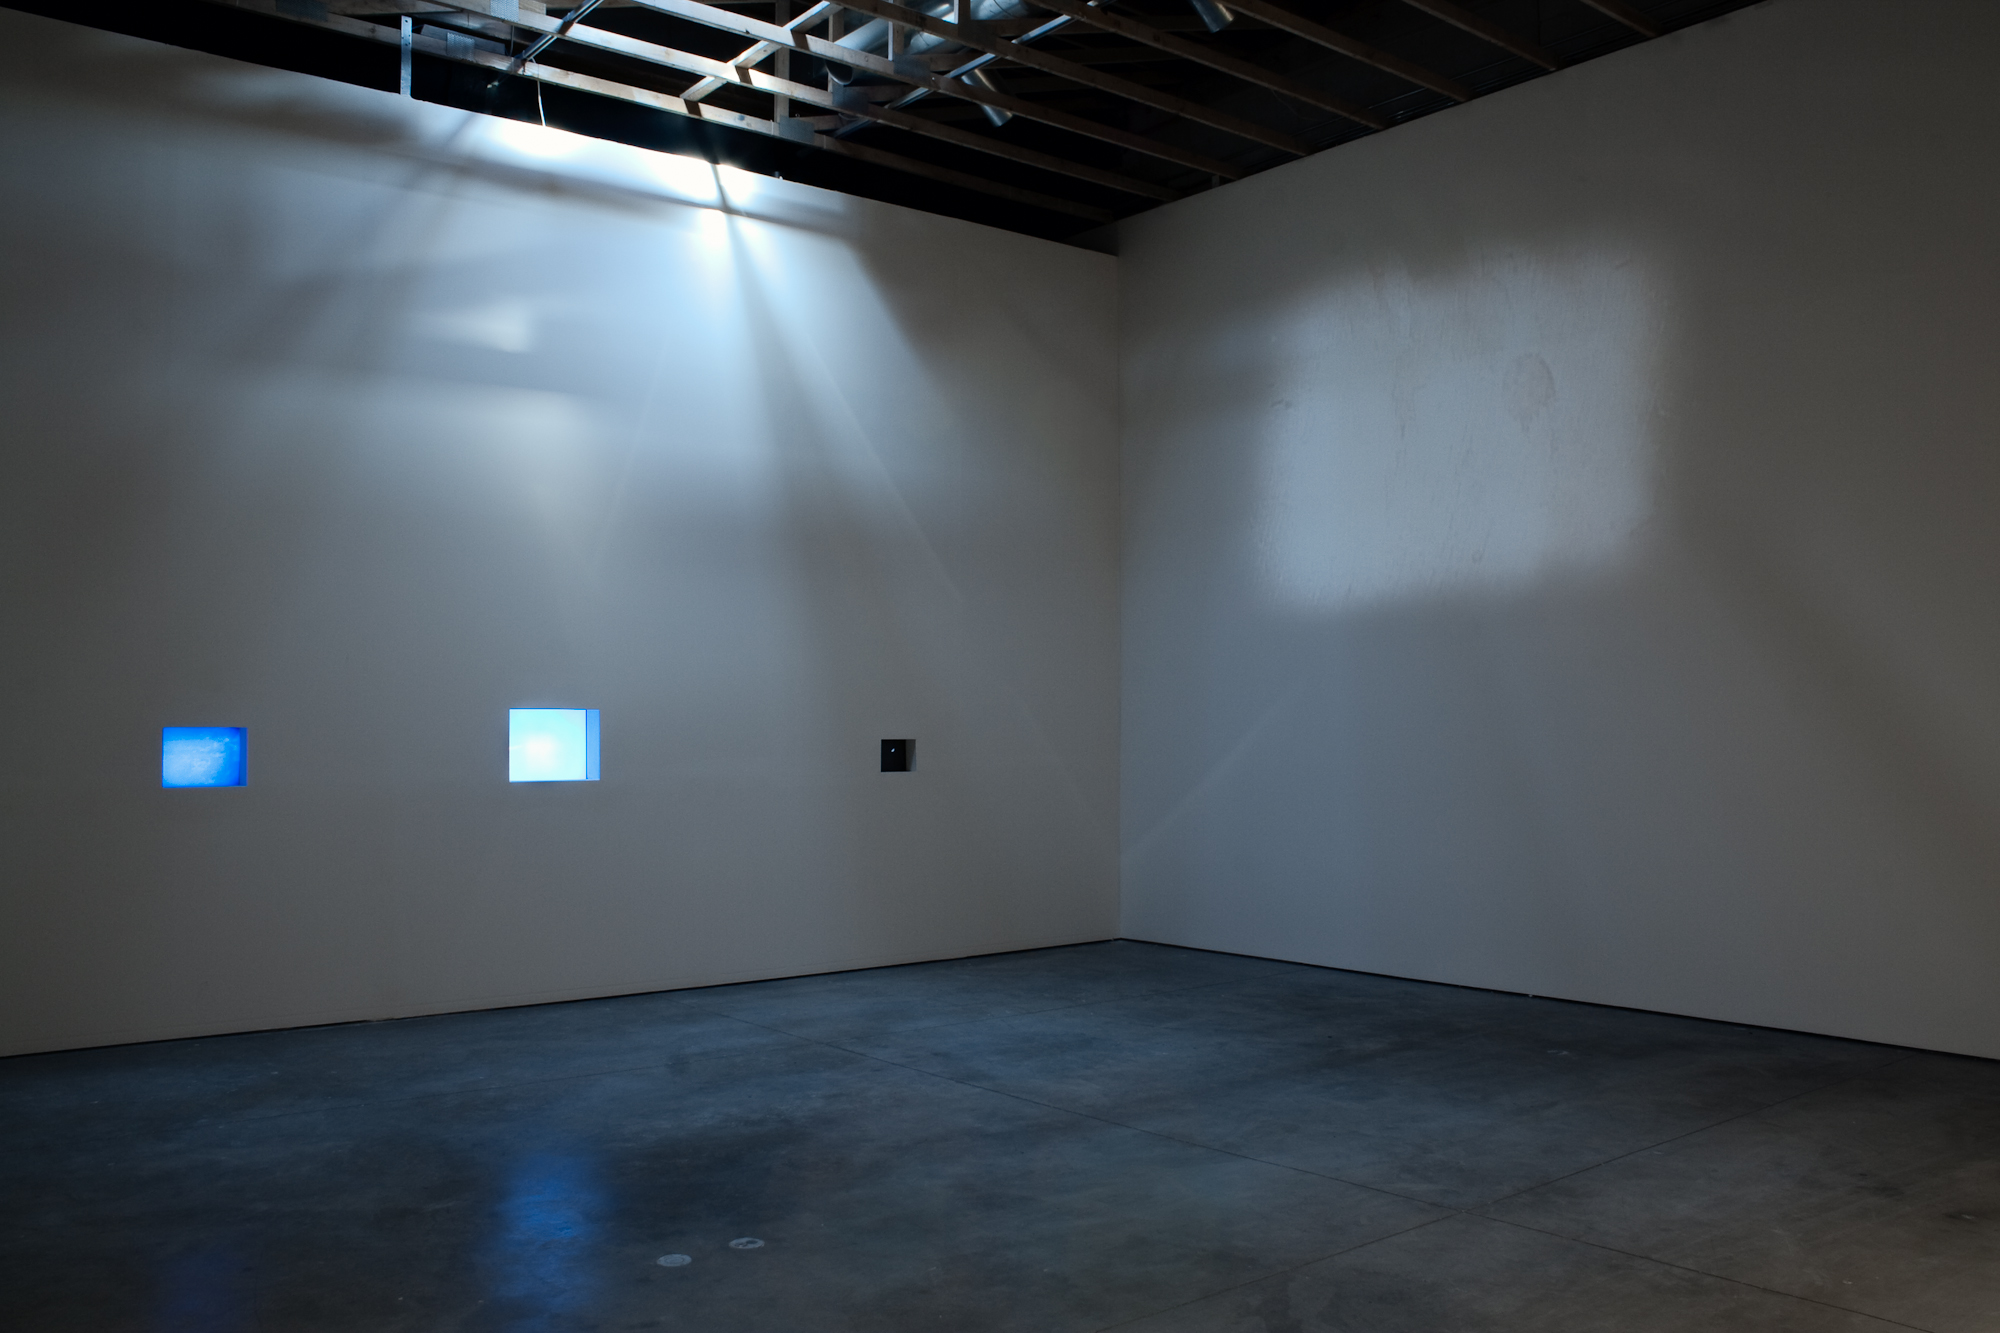  Installation view, Scottsdale Museum of Contemporary Art, 2009-2010 